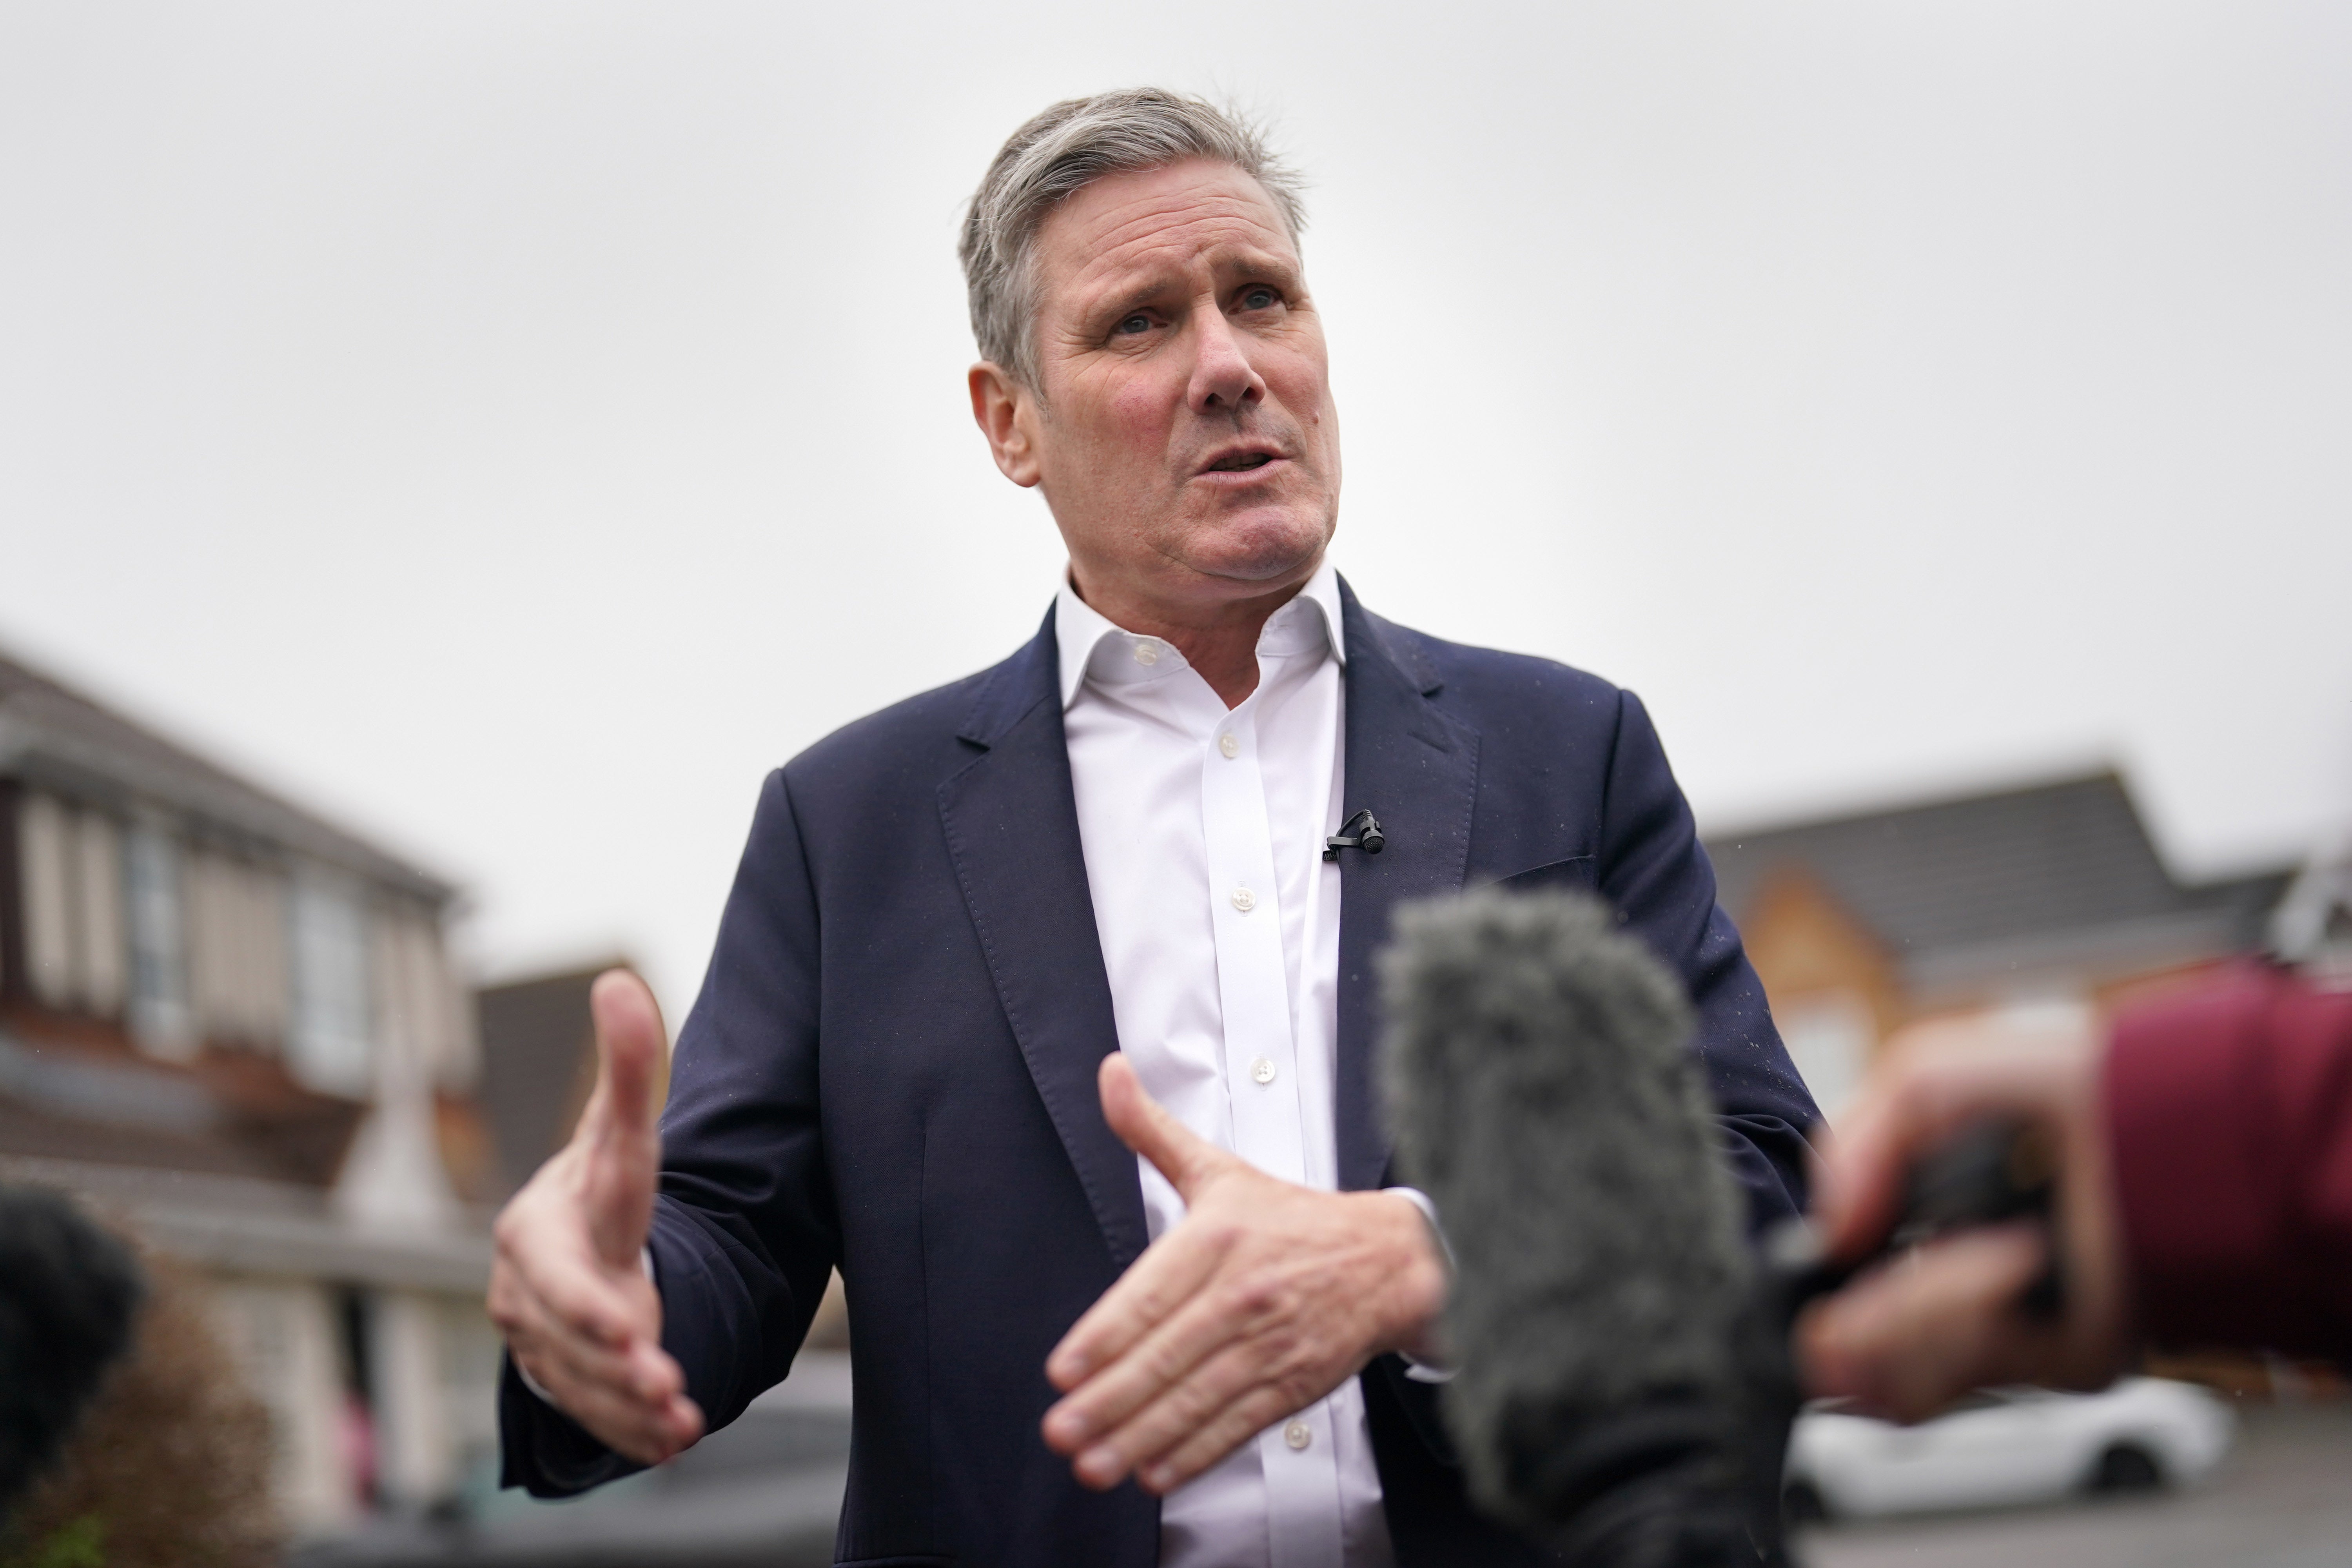 Starmer said ‘growth, growth, growth’ is Labour’s policy agenda